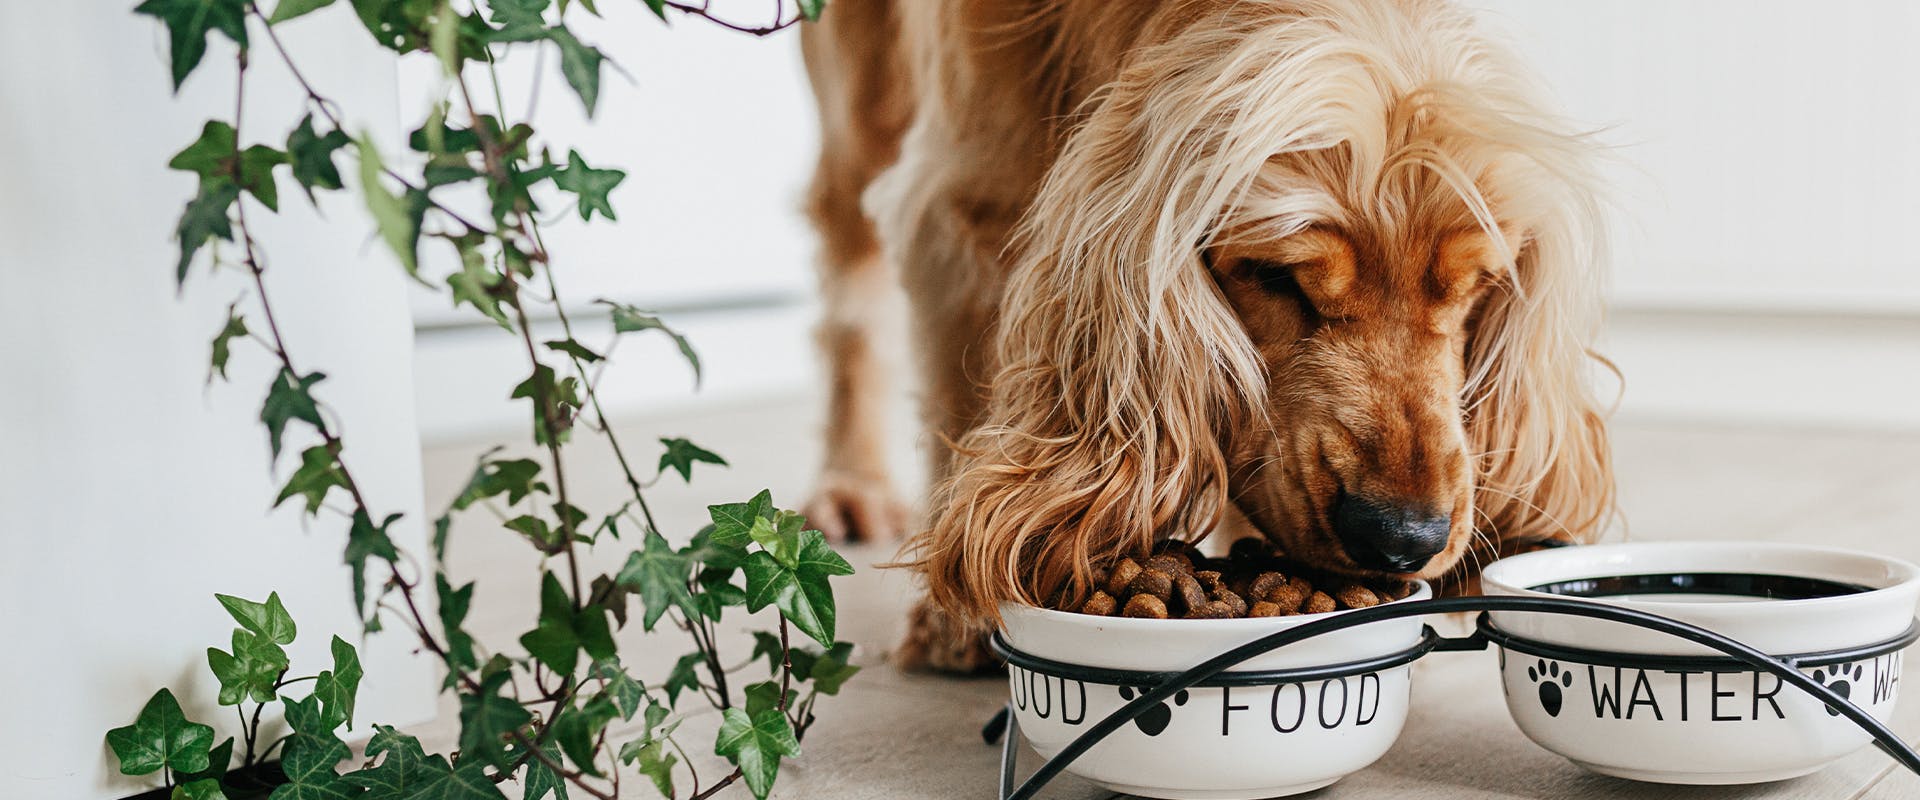 A dog eating from a bowl of dog biscuits